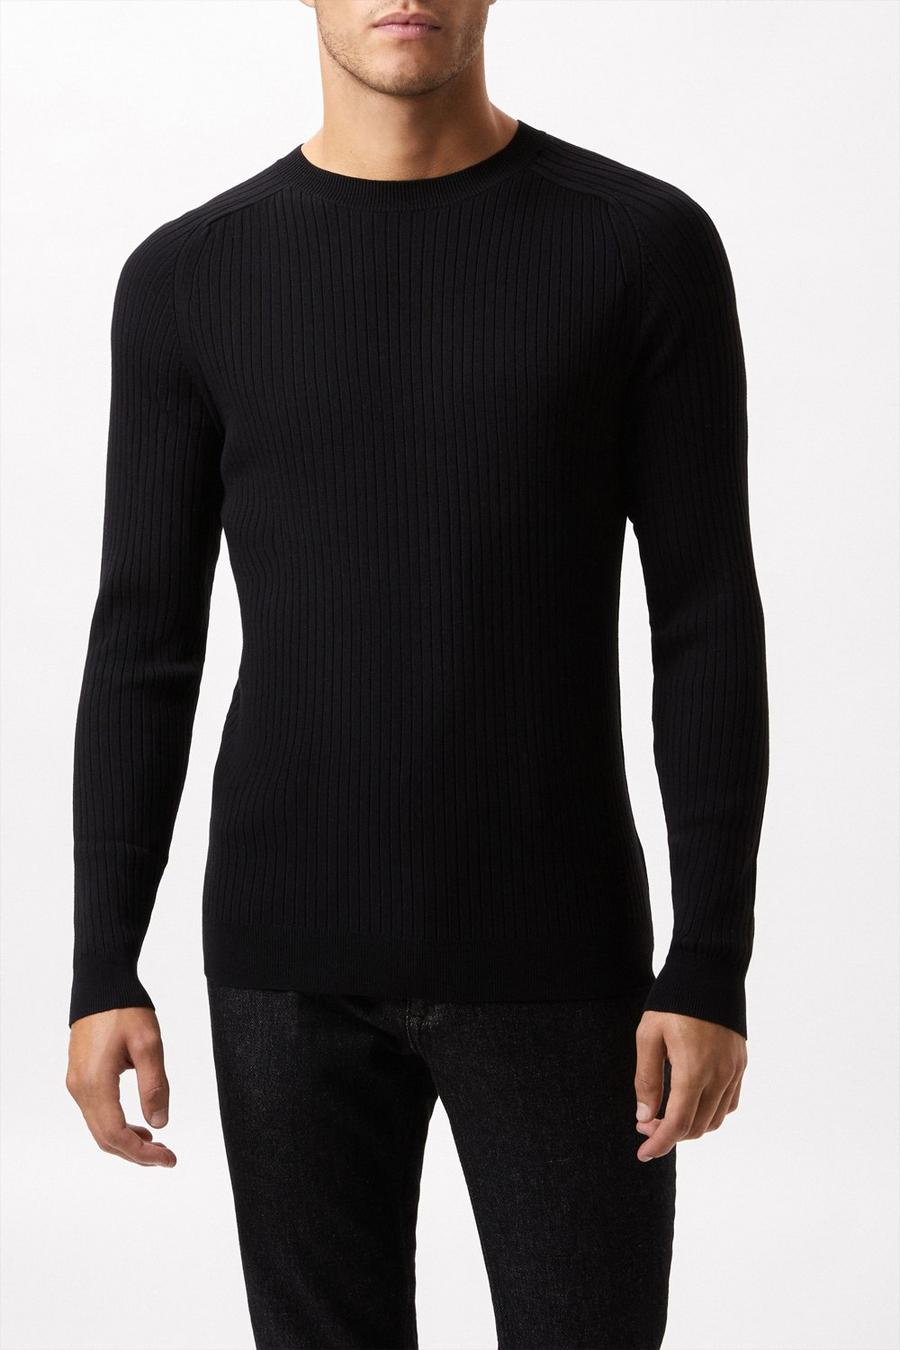 Premium Black Muscle Fit Knitted Ribbed Crew Neck Jumper